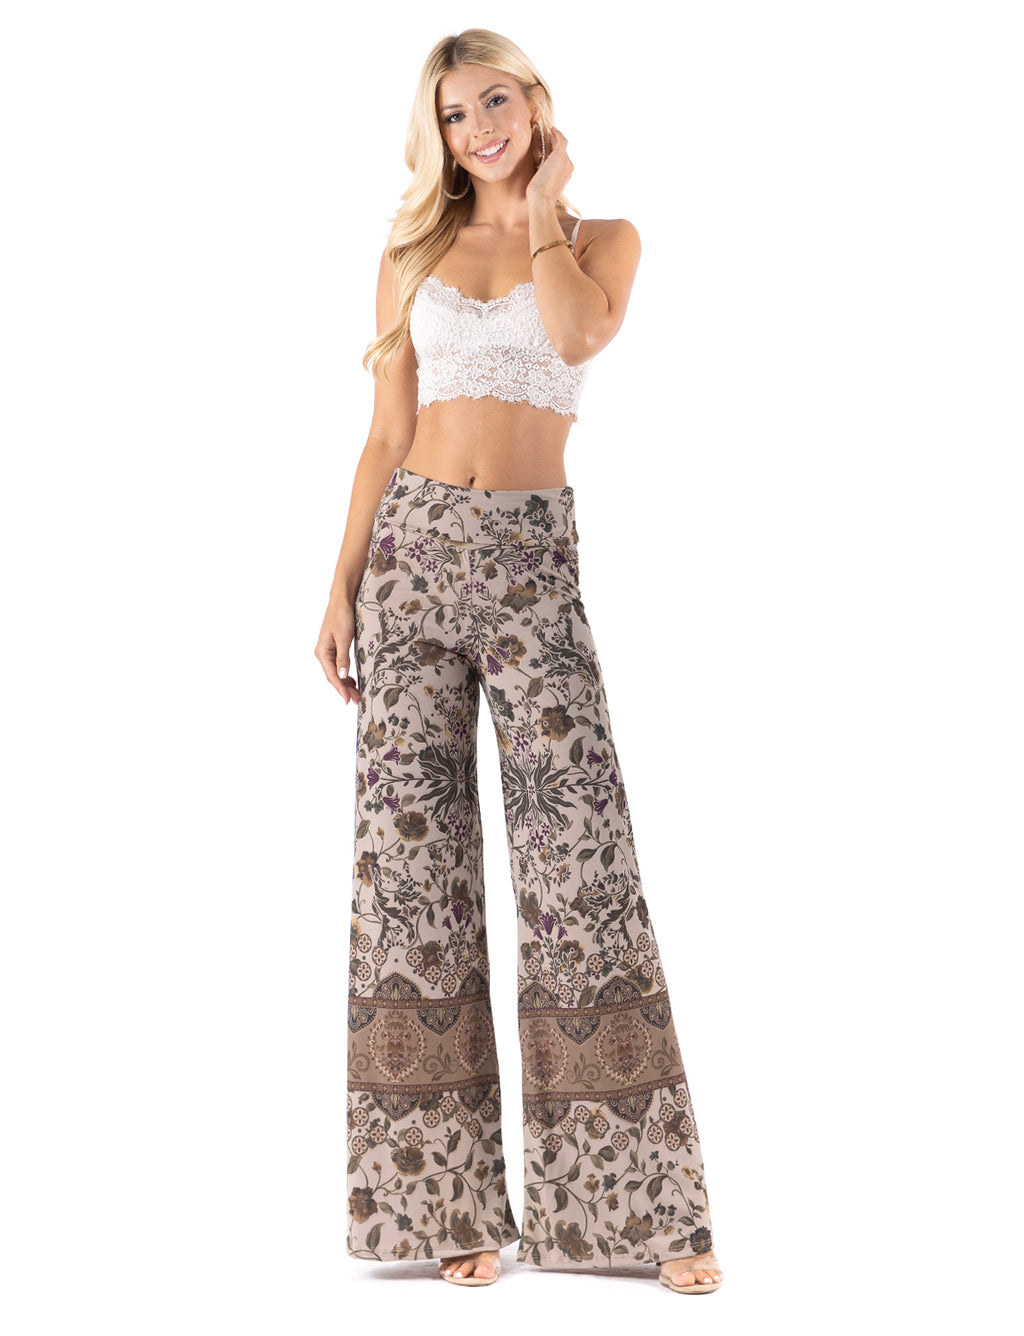 Beautiful woman wearing this amazing Tan Vintage Floral High waist palazzo pants featuring pockets, wide legs, and a comfortable stretchy fabric Perfect for any activity,relaxing day,beautiful and unique,comfortable and flattering